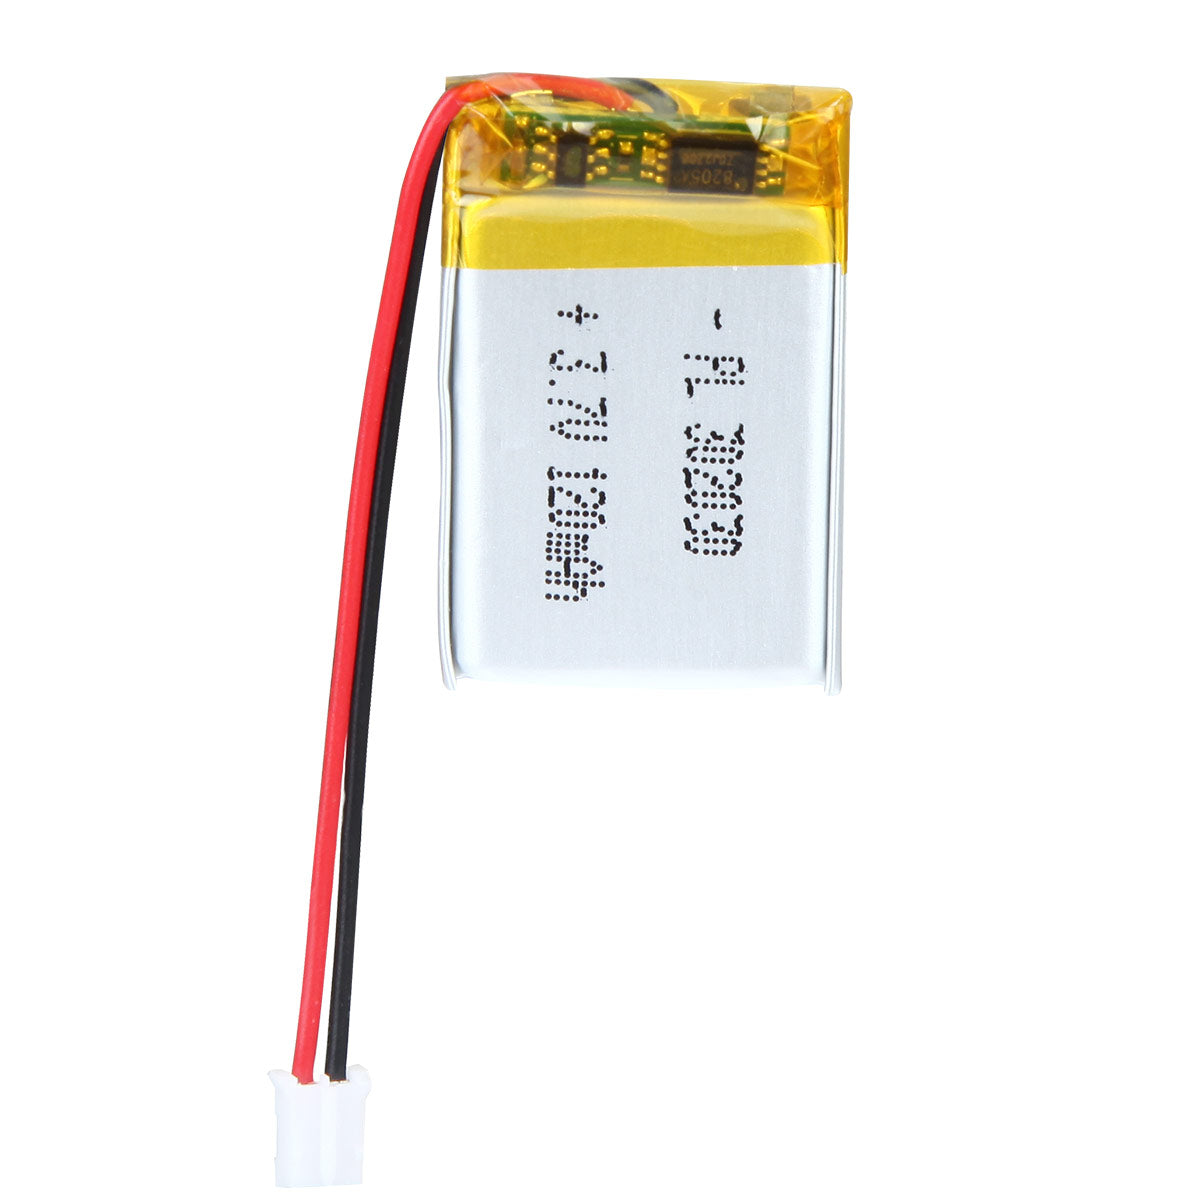 YDL 3.7V 120mAh 302030 Rechargeable Lithium  Polymer Battery